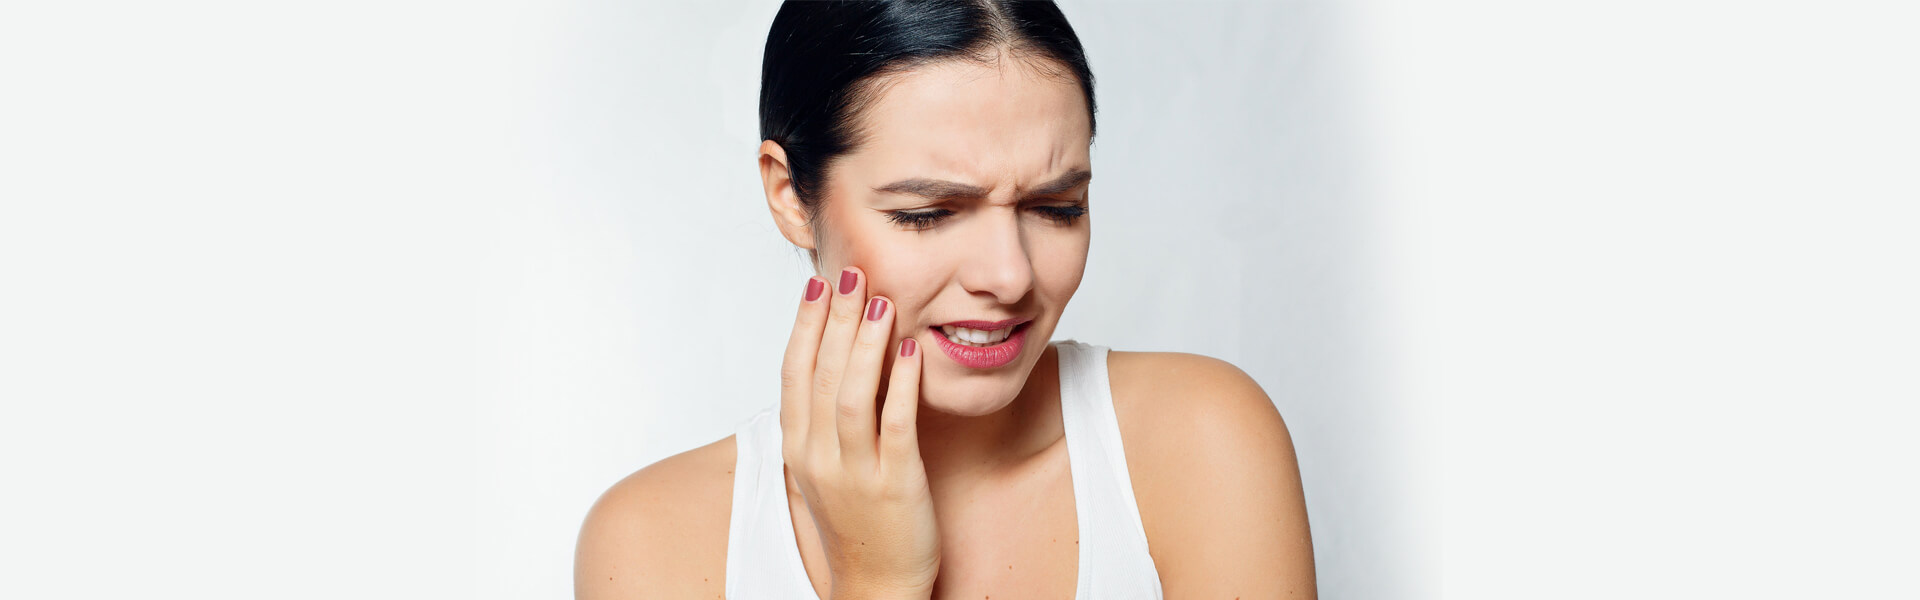 Dental Pain & Dental Issue- No more an obstruction